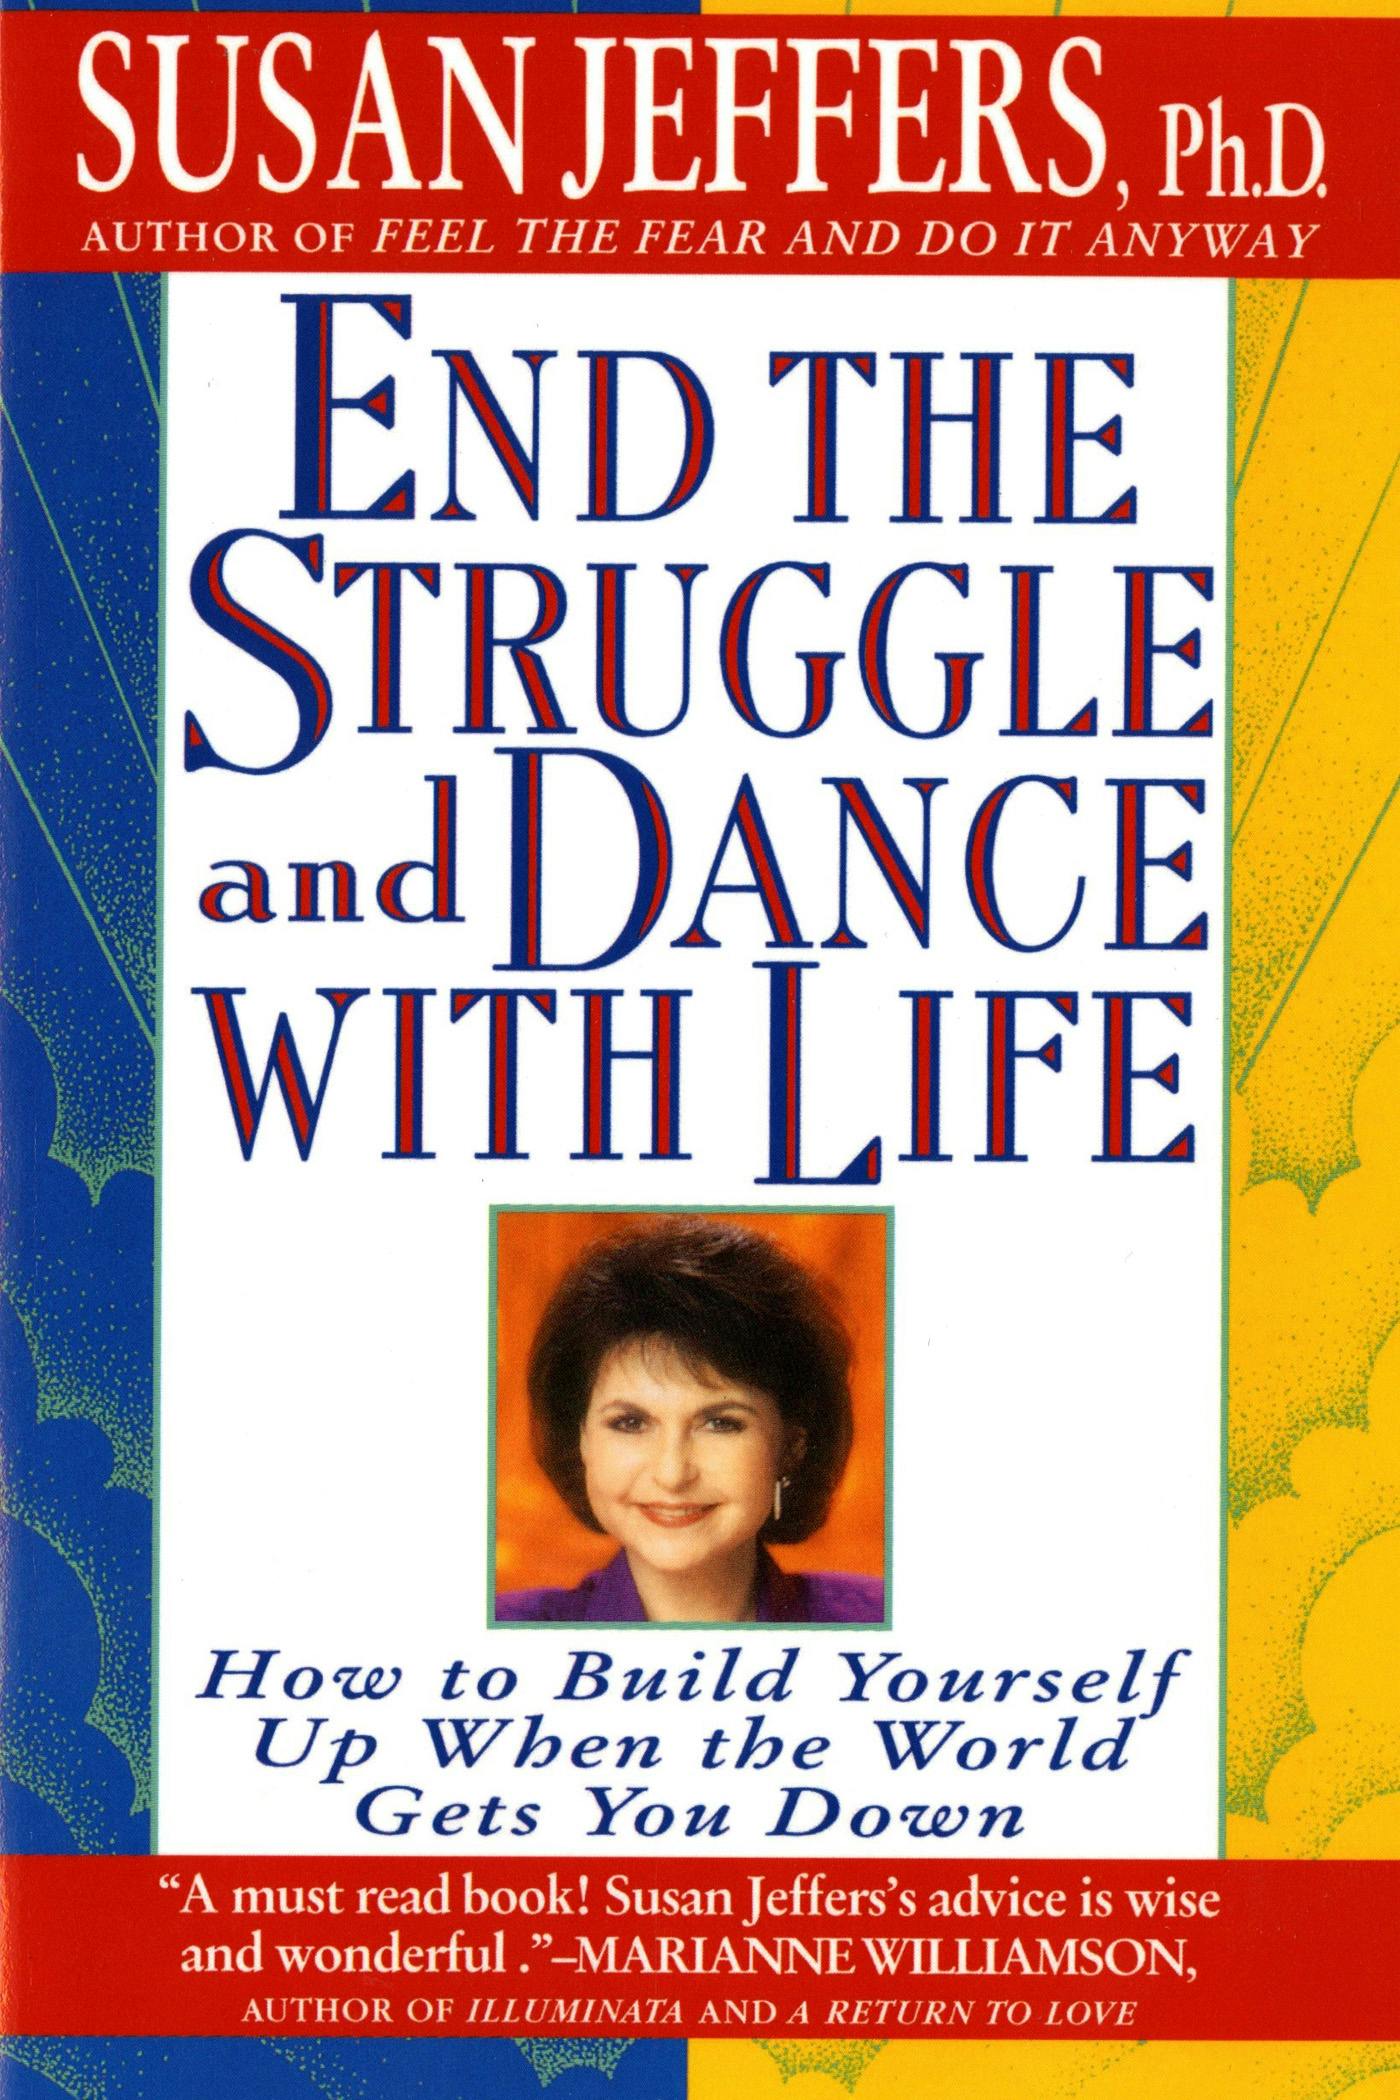 You Can Heal Your Life - By Louise Hay (paperback) : Target